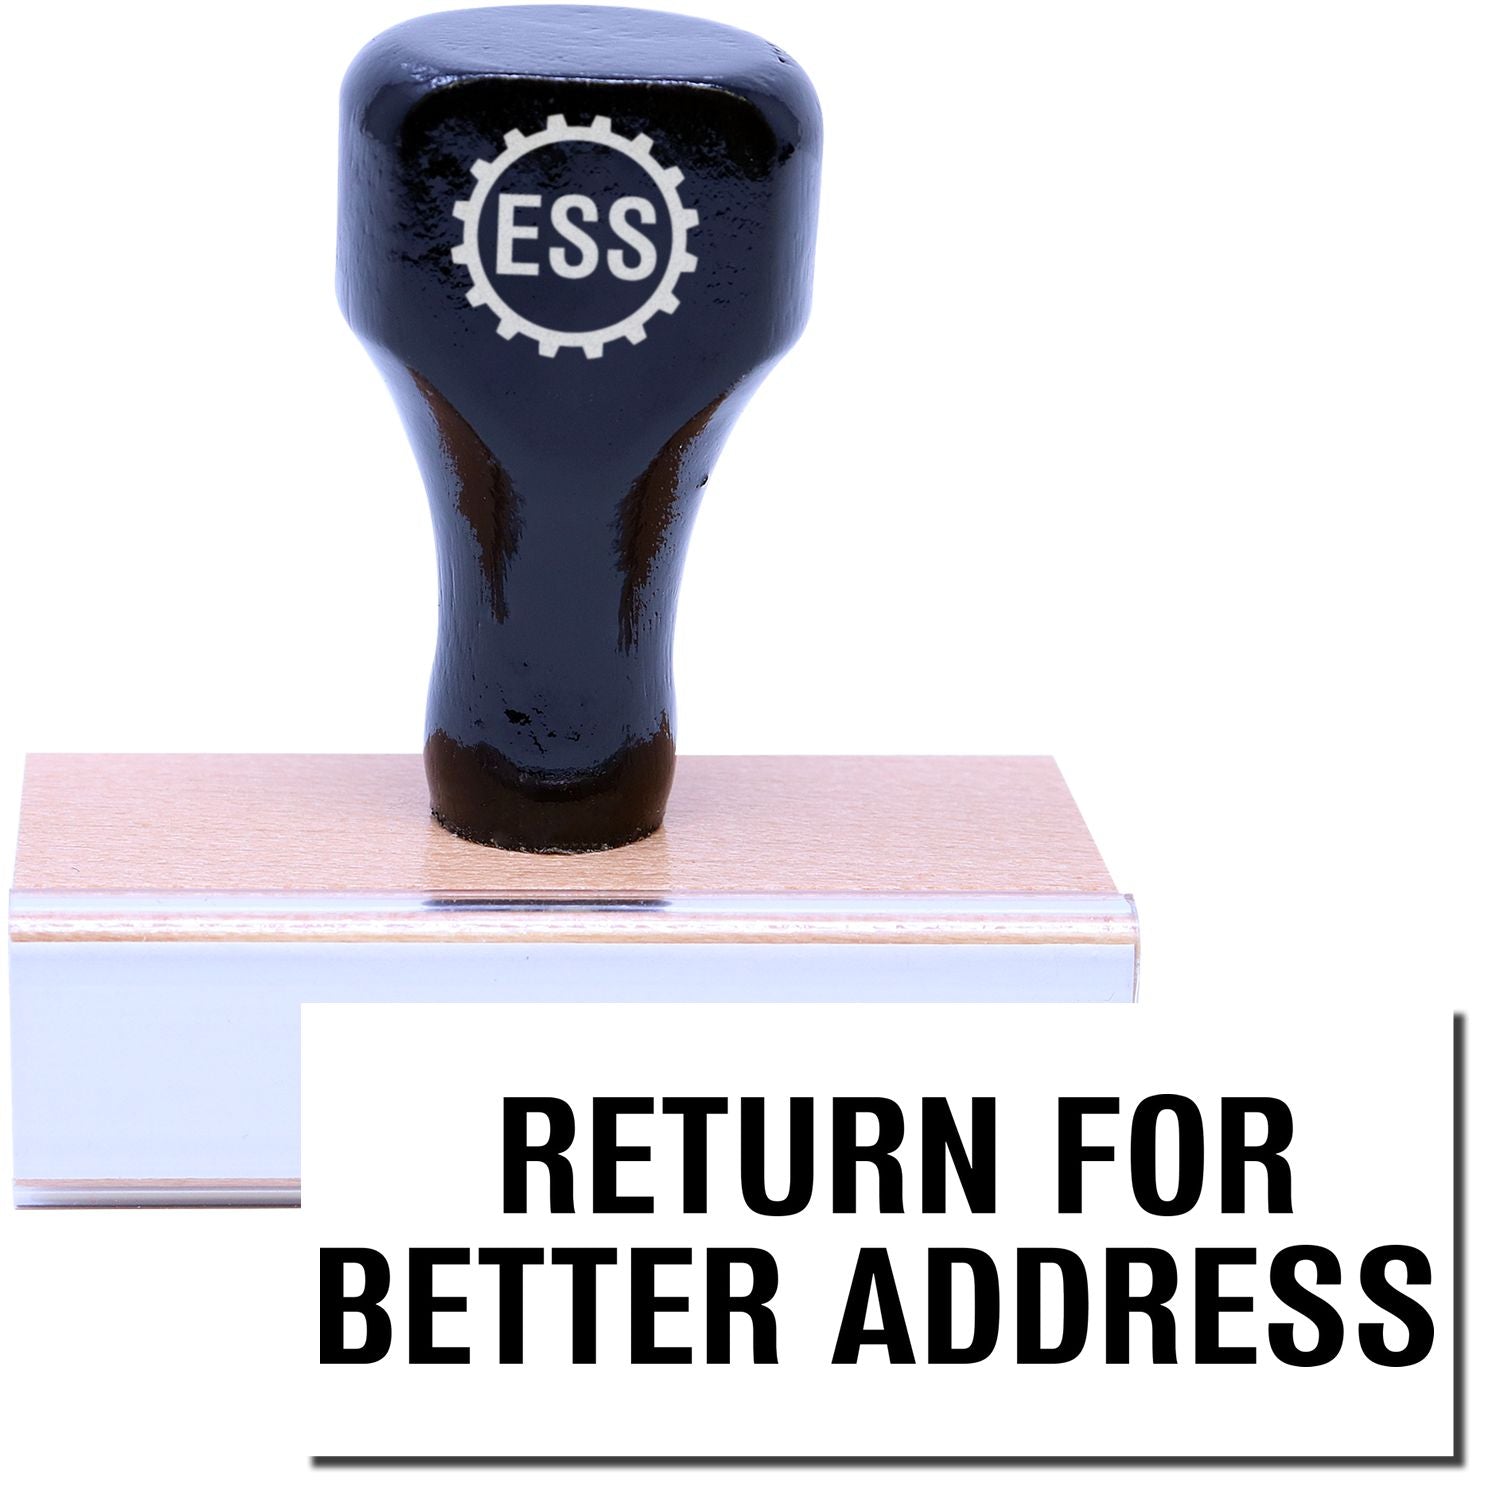 A stock office rubber stamp with a stamped image showing how the text "RETURN FOR BETTER ADDRESS" in a large font is displayed after stamping.